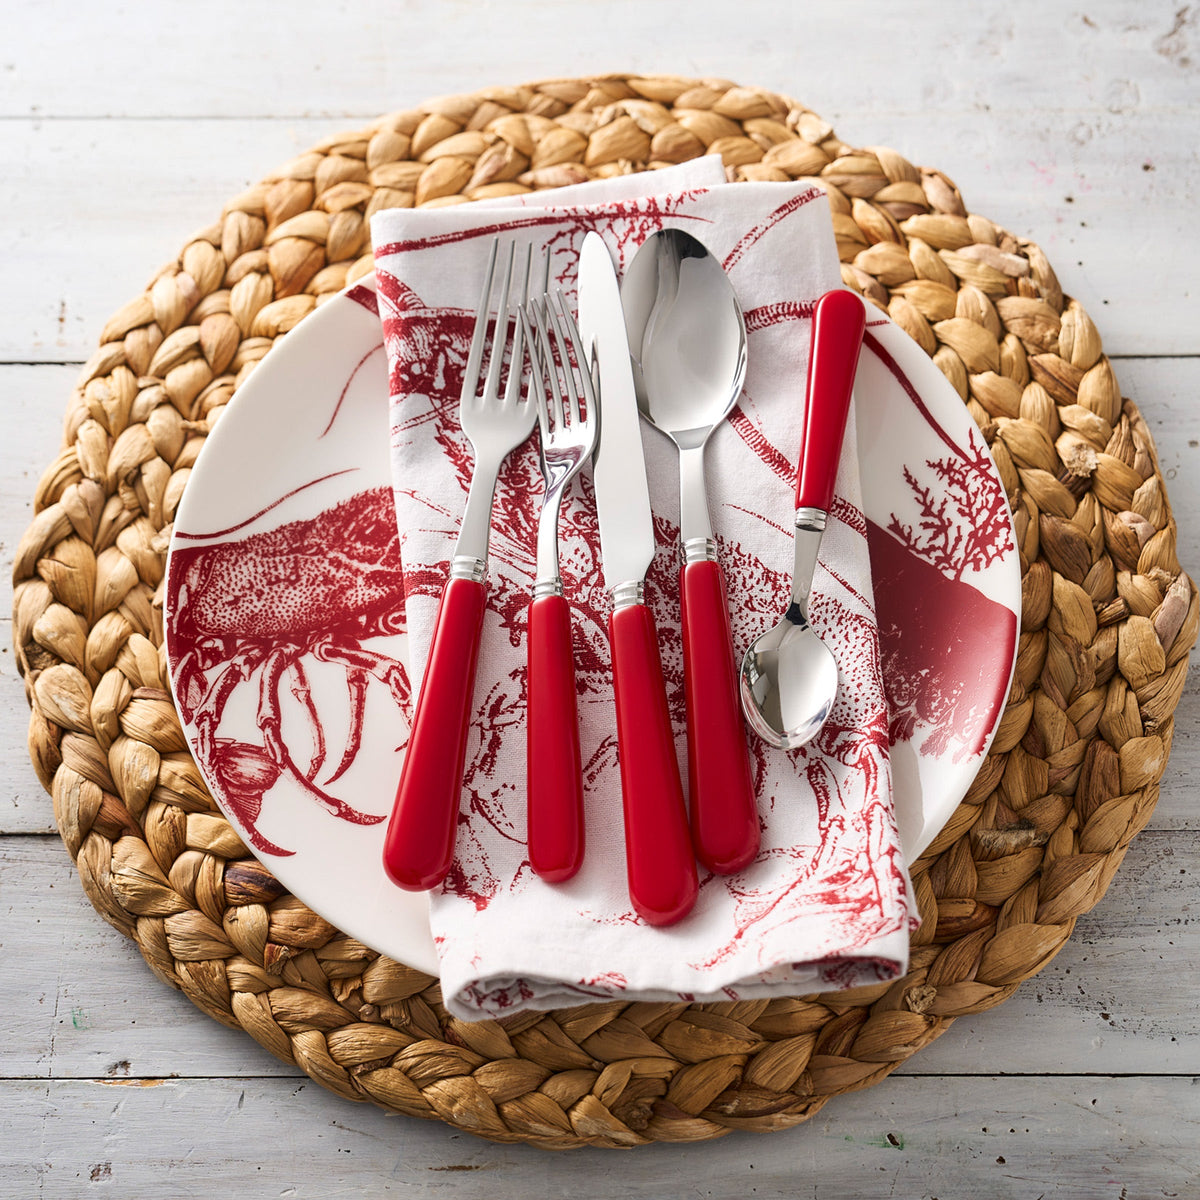 Bistro Red 5-Piece Flatware Setting and Red Lobster Napkin and Dinner Plate from Caskata.